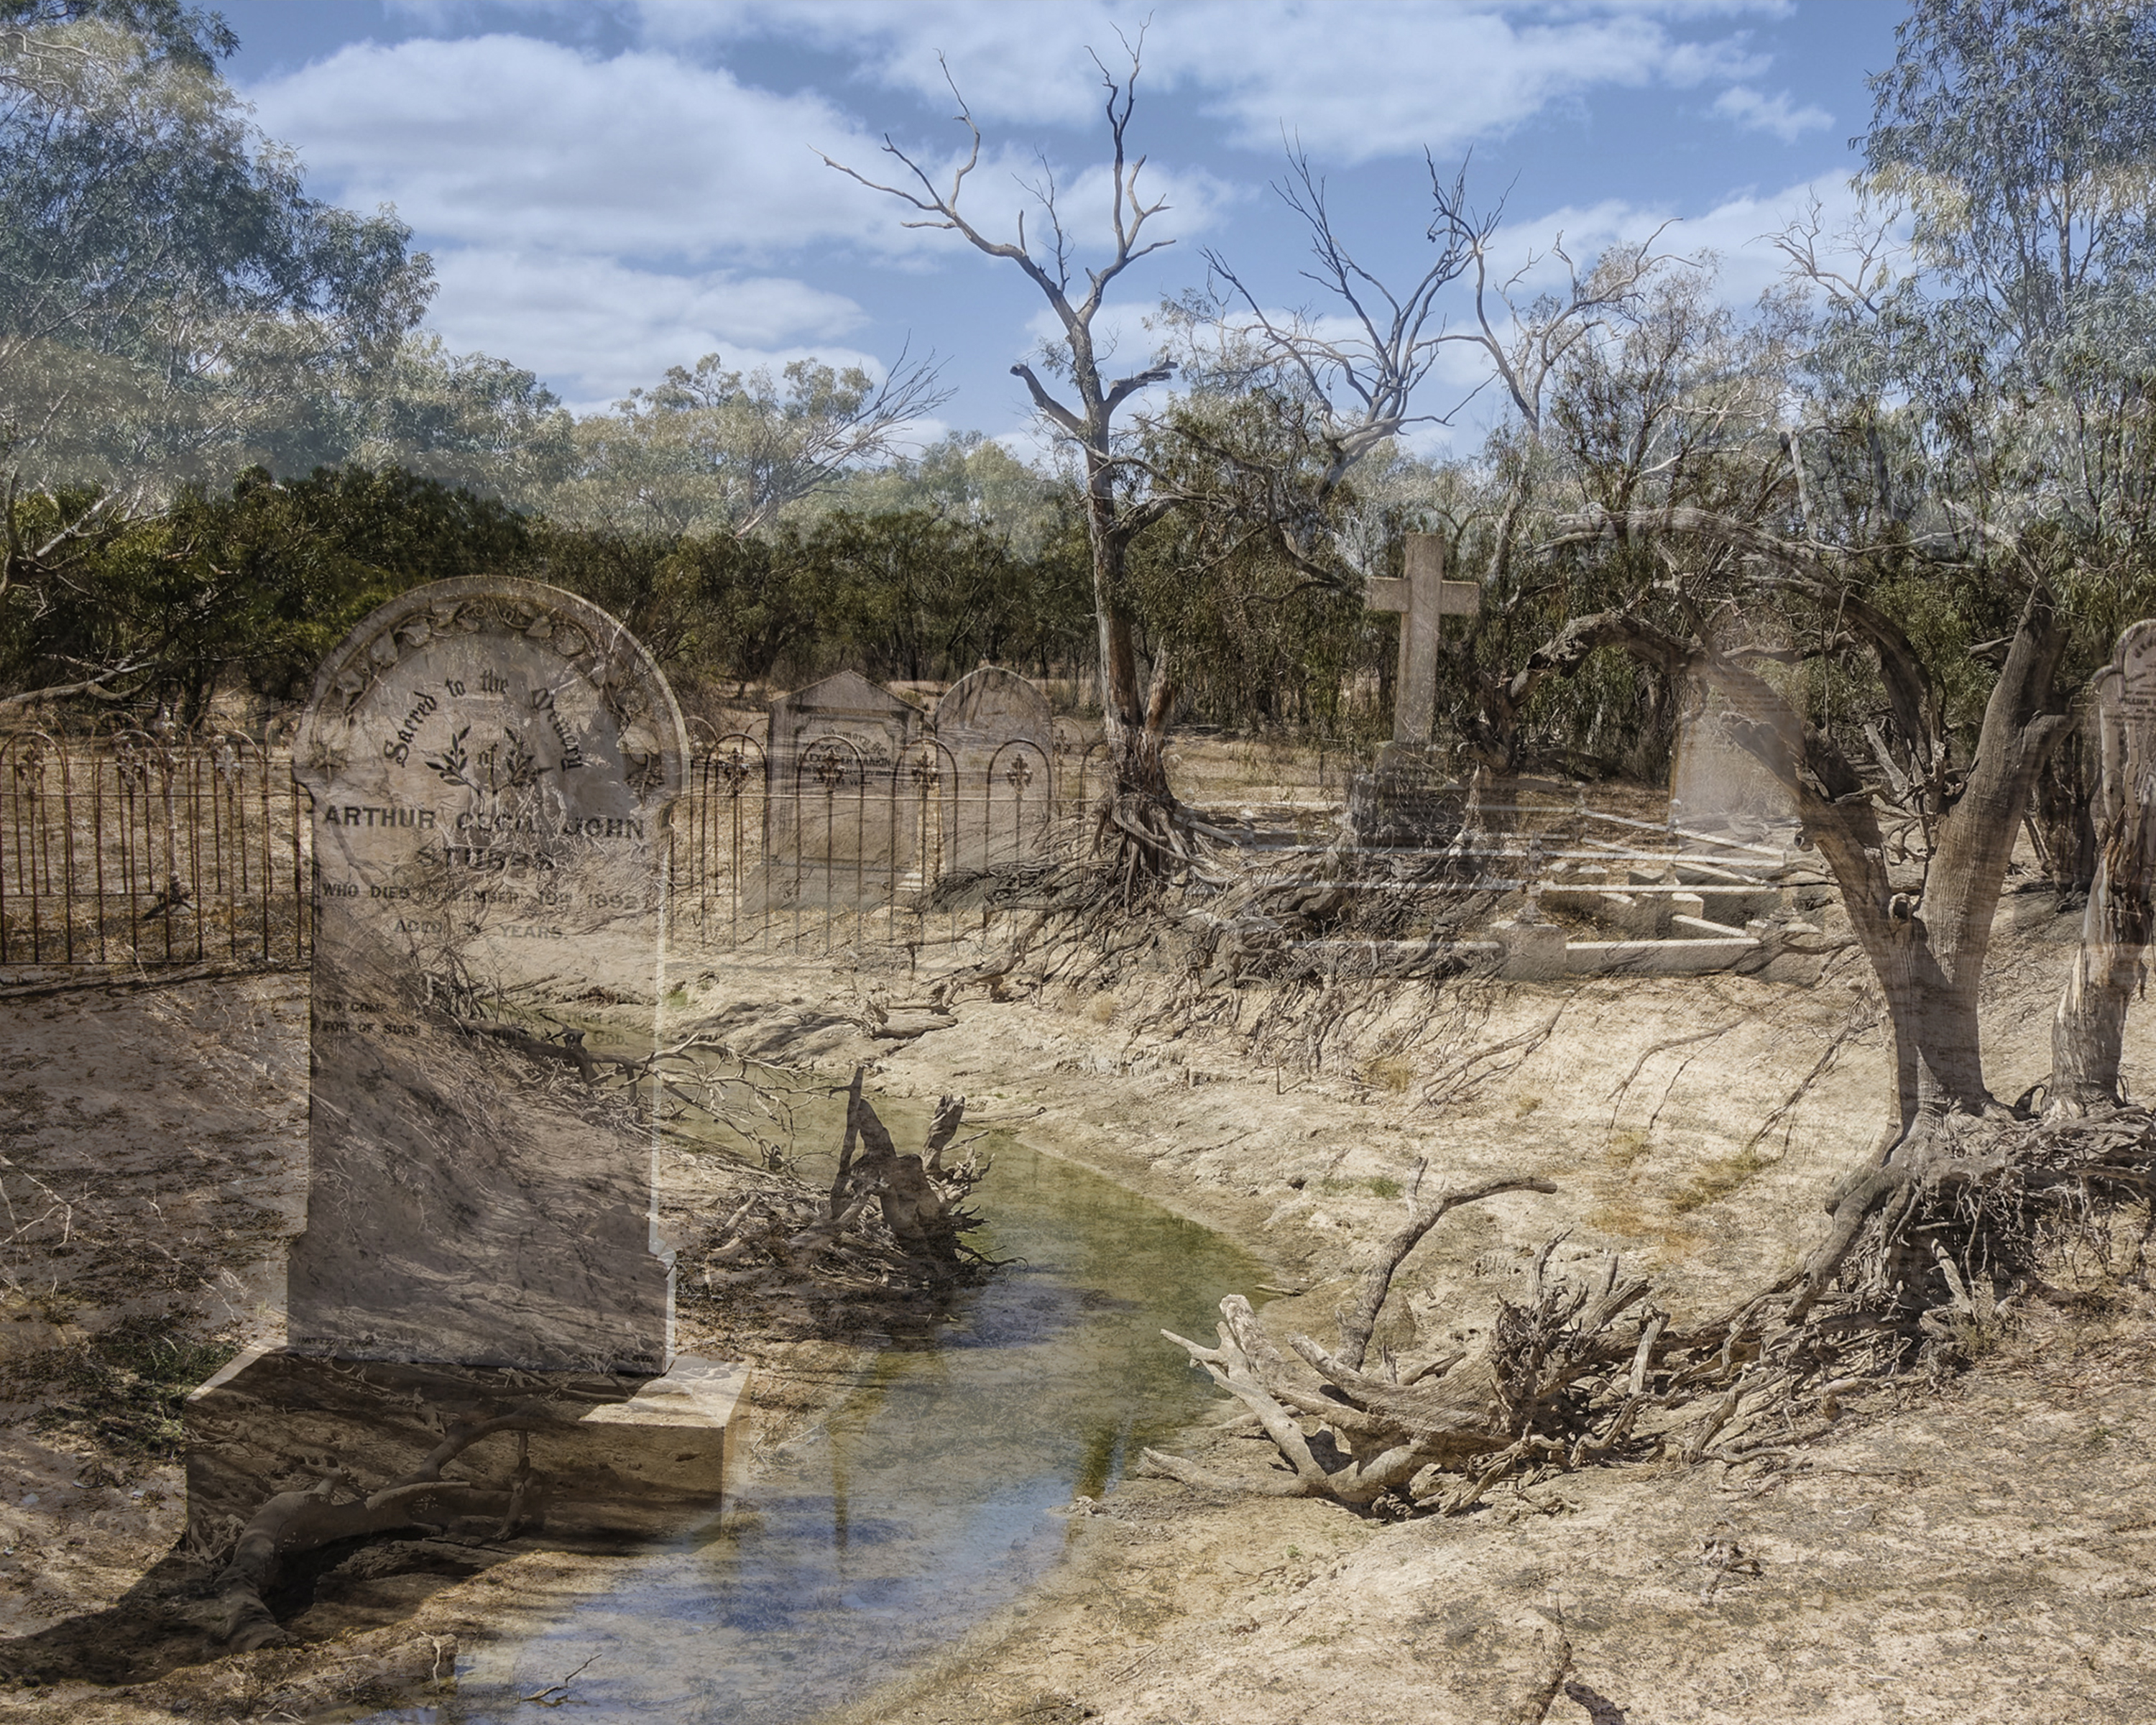 A 2-dimensional photo media artwork. Image features a dry riverbed scene overlayed with a cemetery scene of old tombstones.